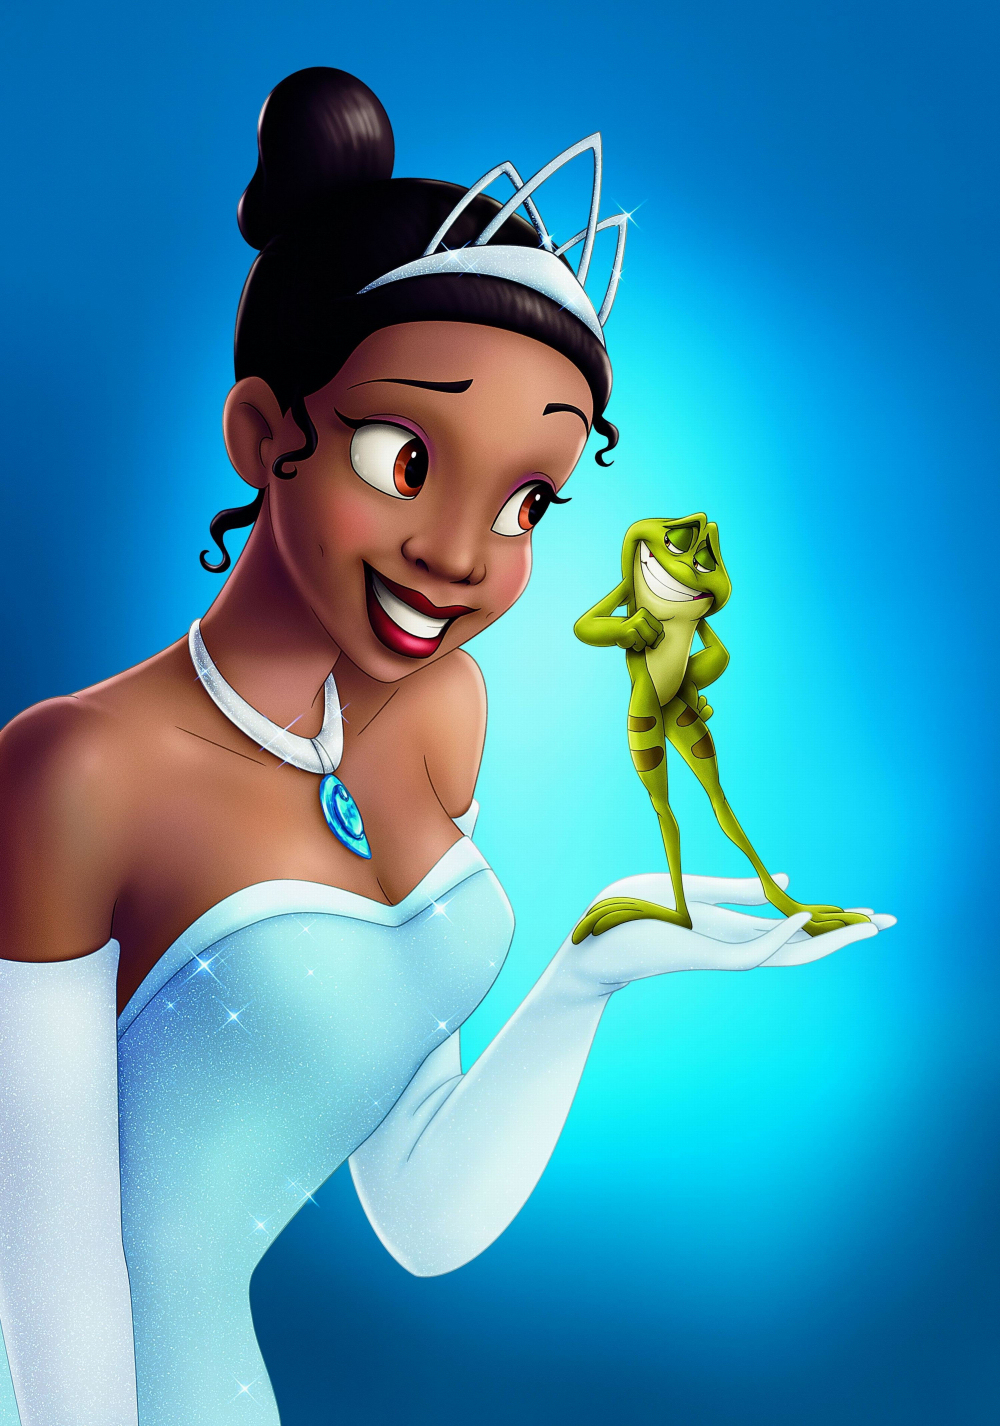 The Princess And The Frog Movie Poster - ID: 138770 - Image Abyss.